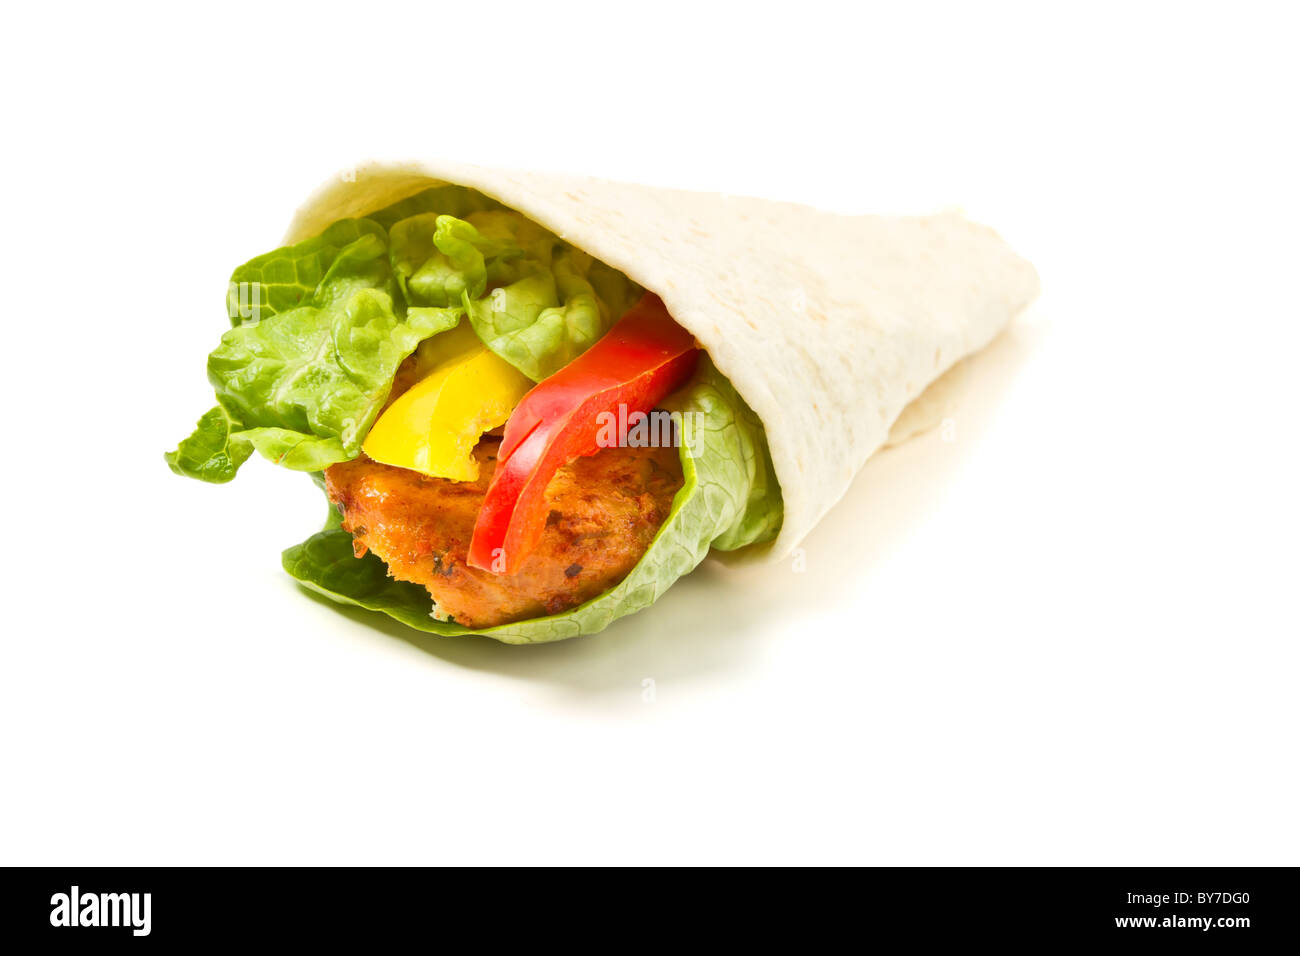 Spicy chicken with salad and salsa wrapped in a soft flour tortilla. Stock Photo